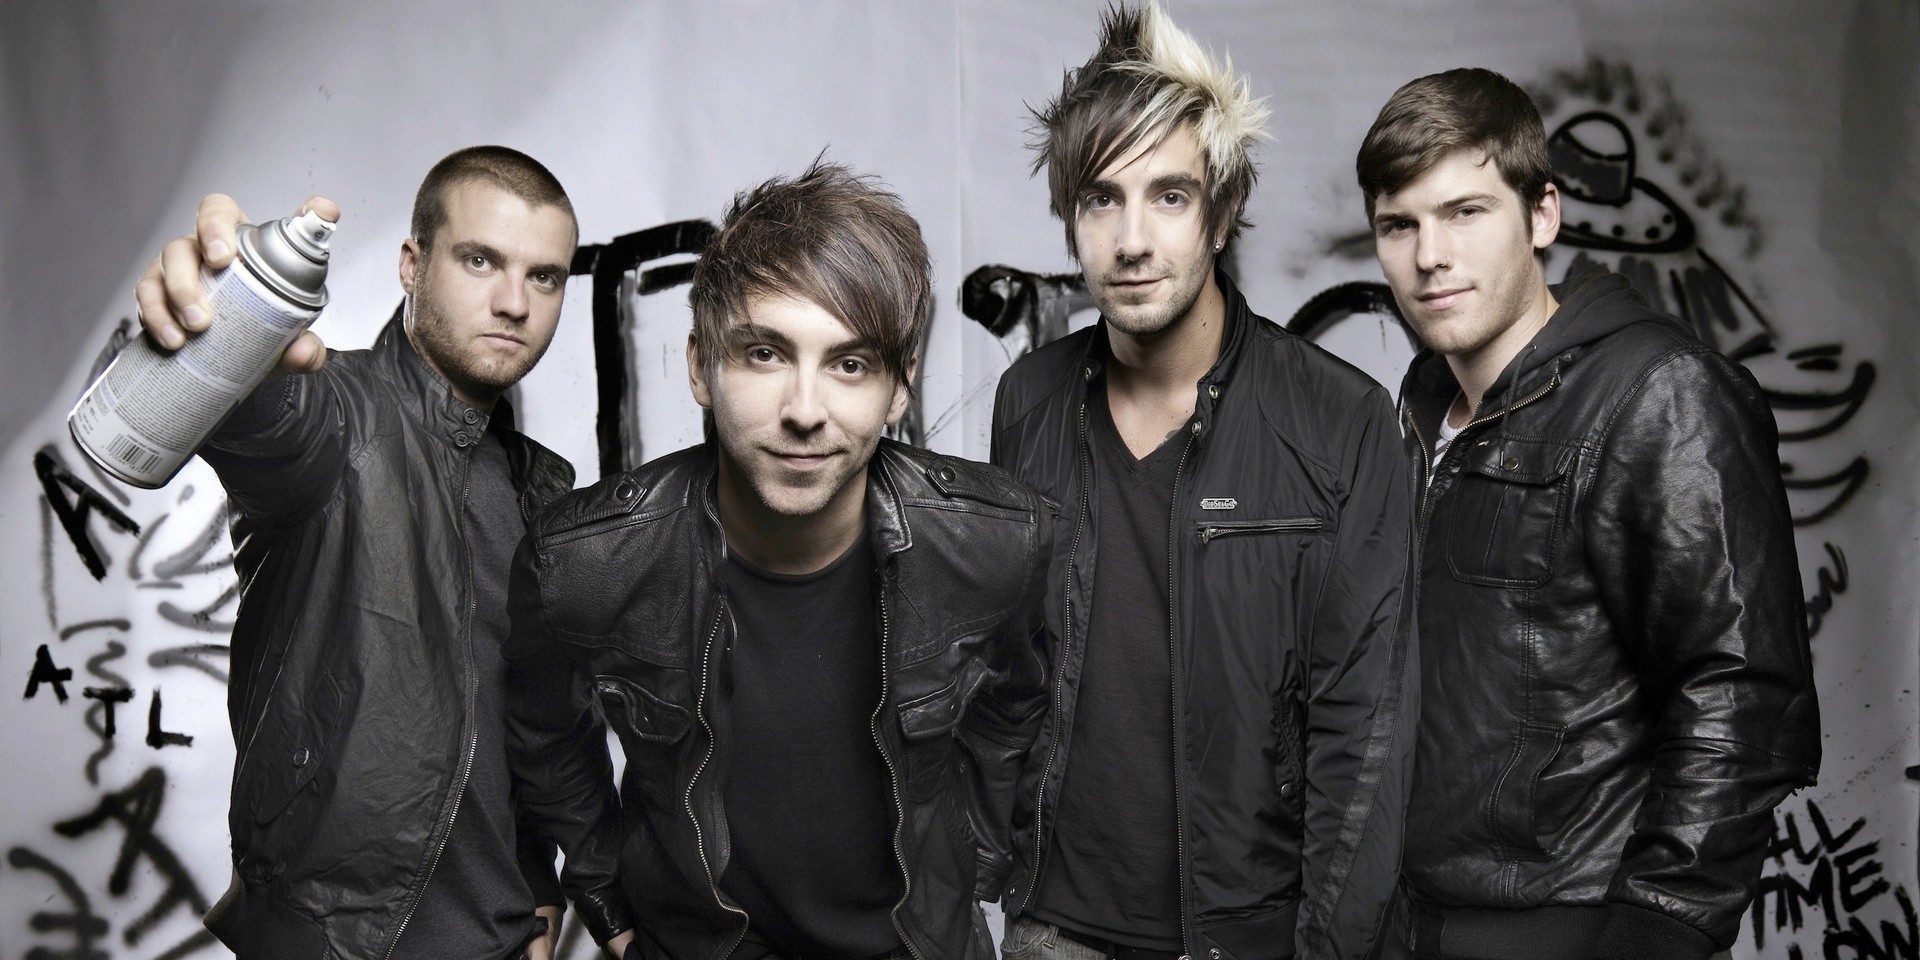 All Time Low brings The Young Renegades Tour to Singapore